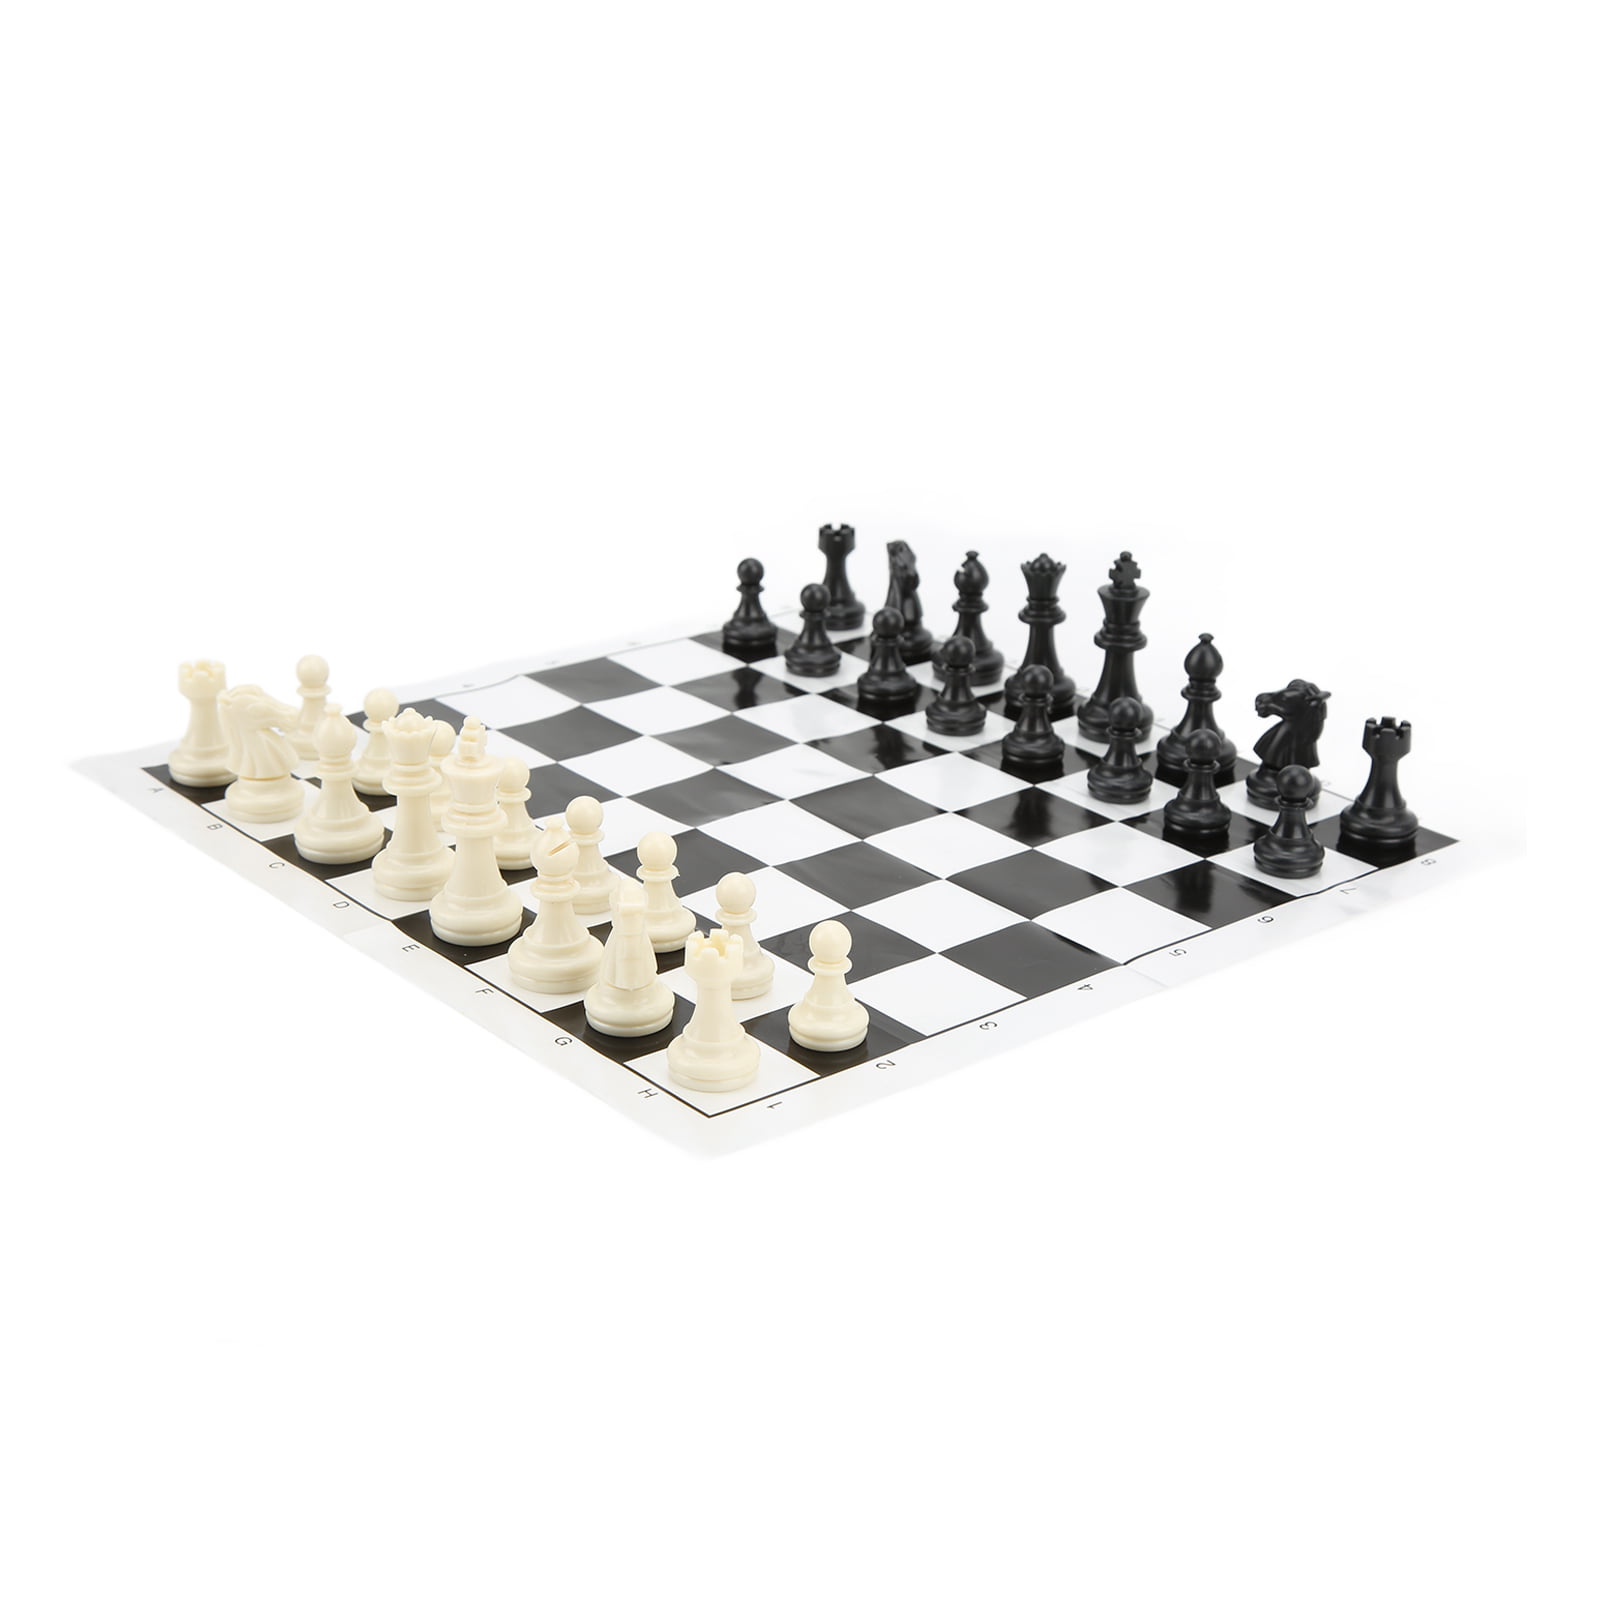 32 Tournament Chess Pieces Set Weighted Plastic Pieces with King Black&White 